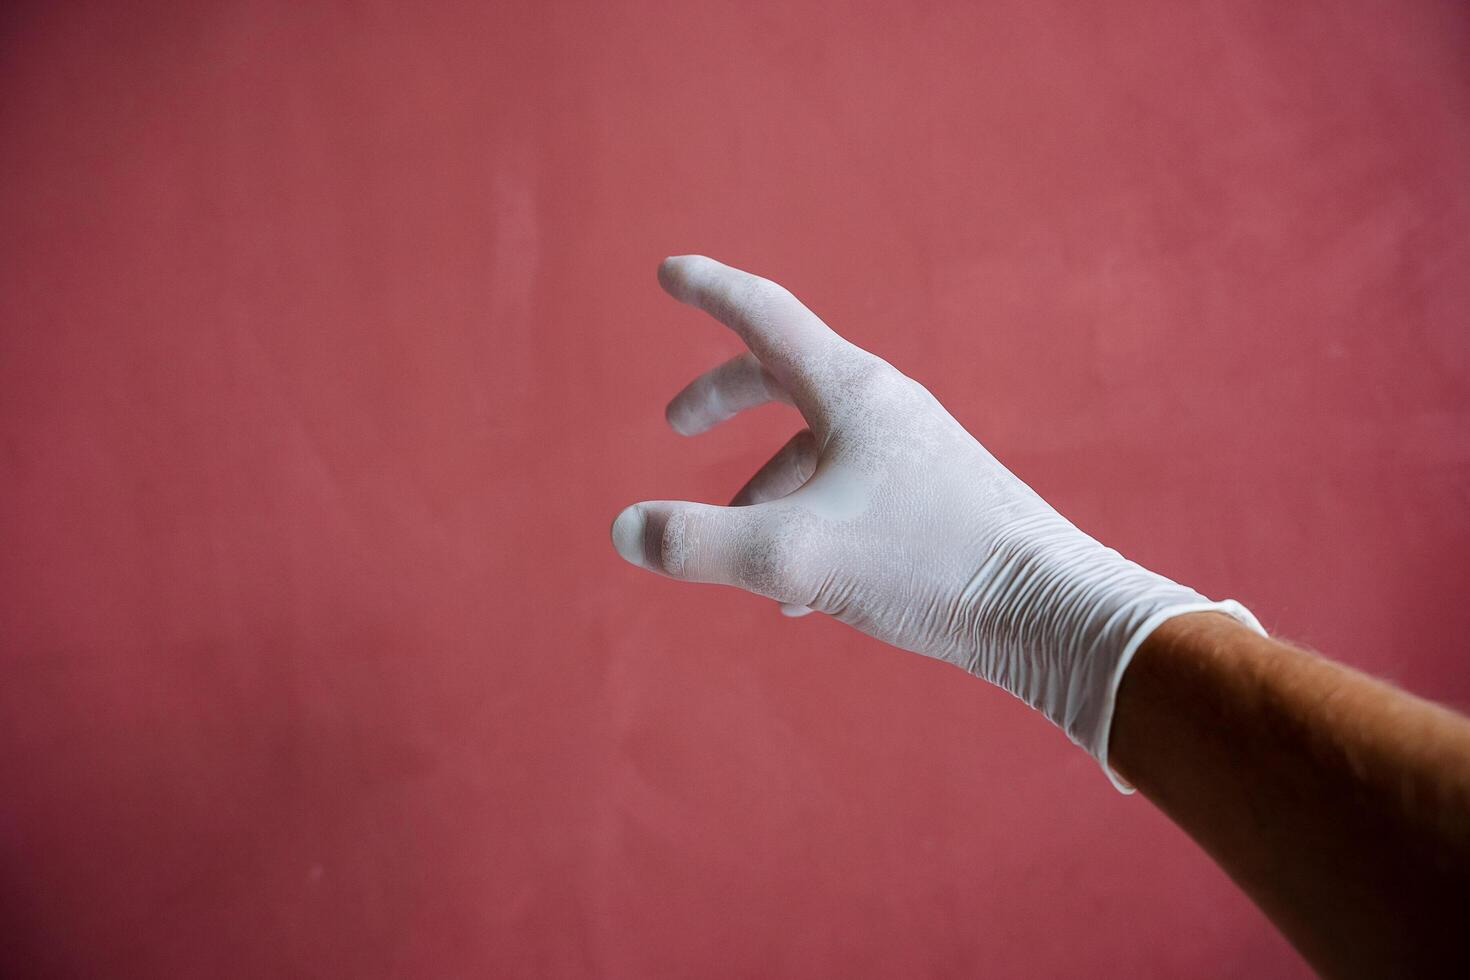 a hand in a white medical glove stretches forward, a sweaty hand under latex, fingers spread out against a maroon wall, hand protection photo